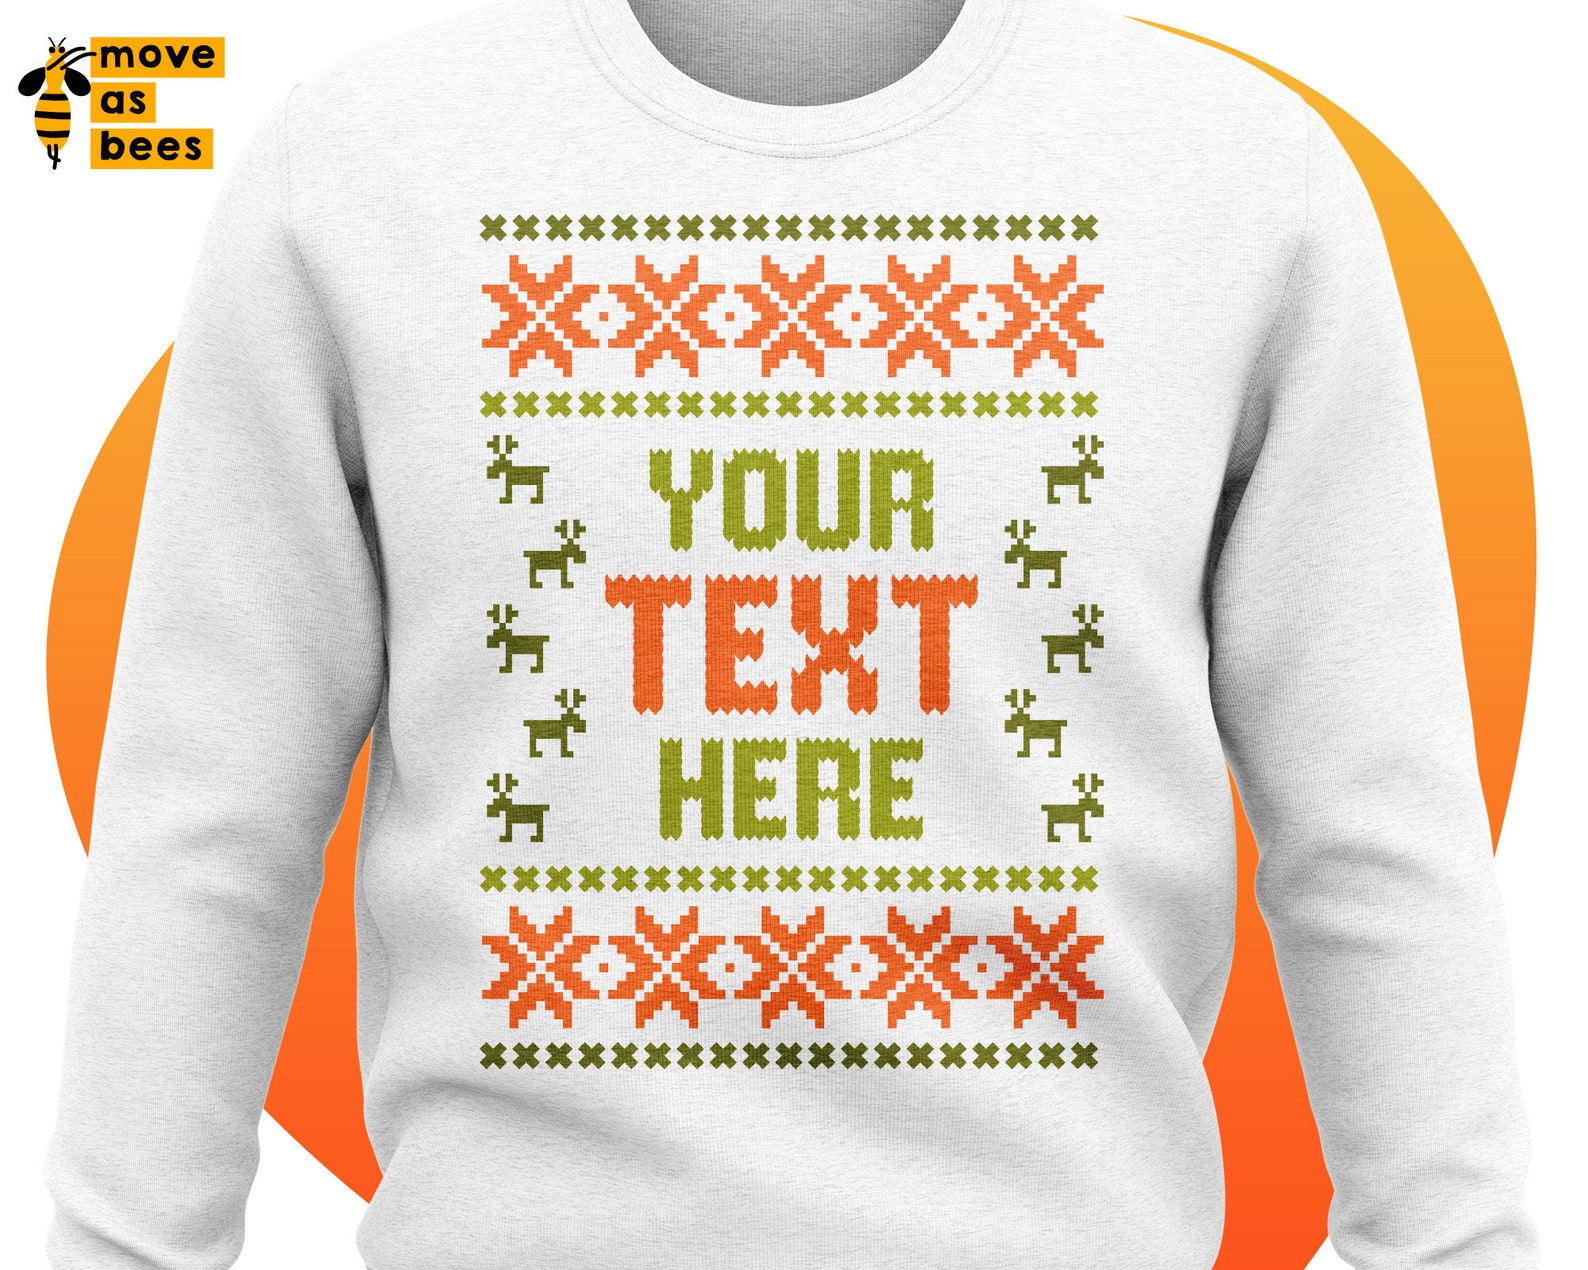 Ugly Sweater Design Template